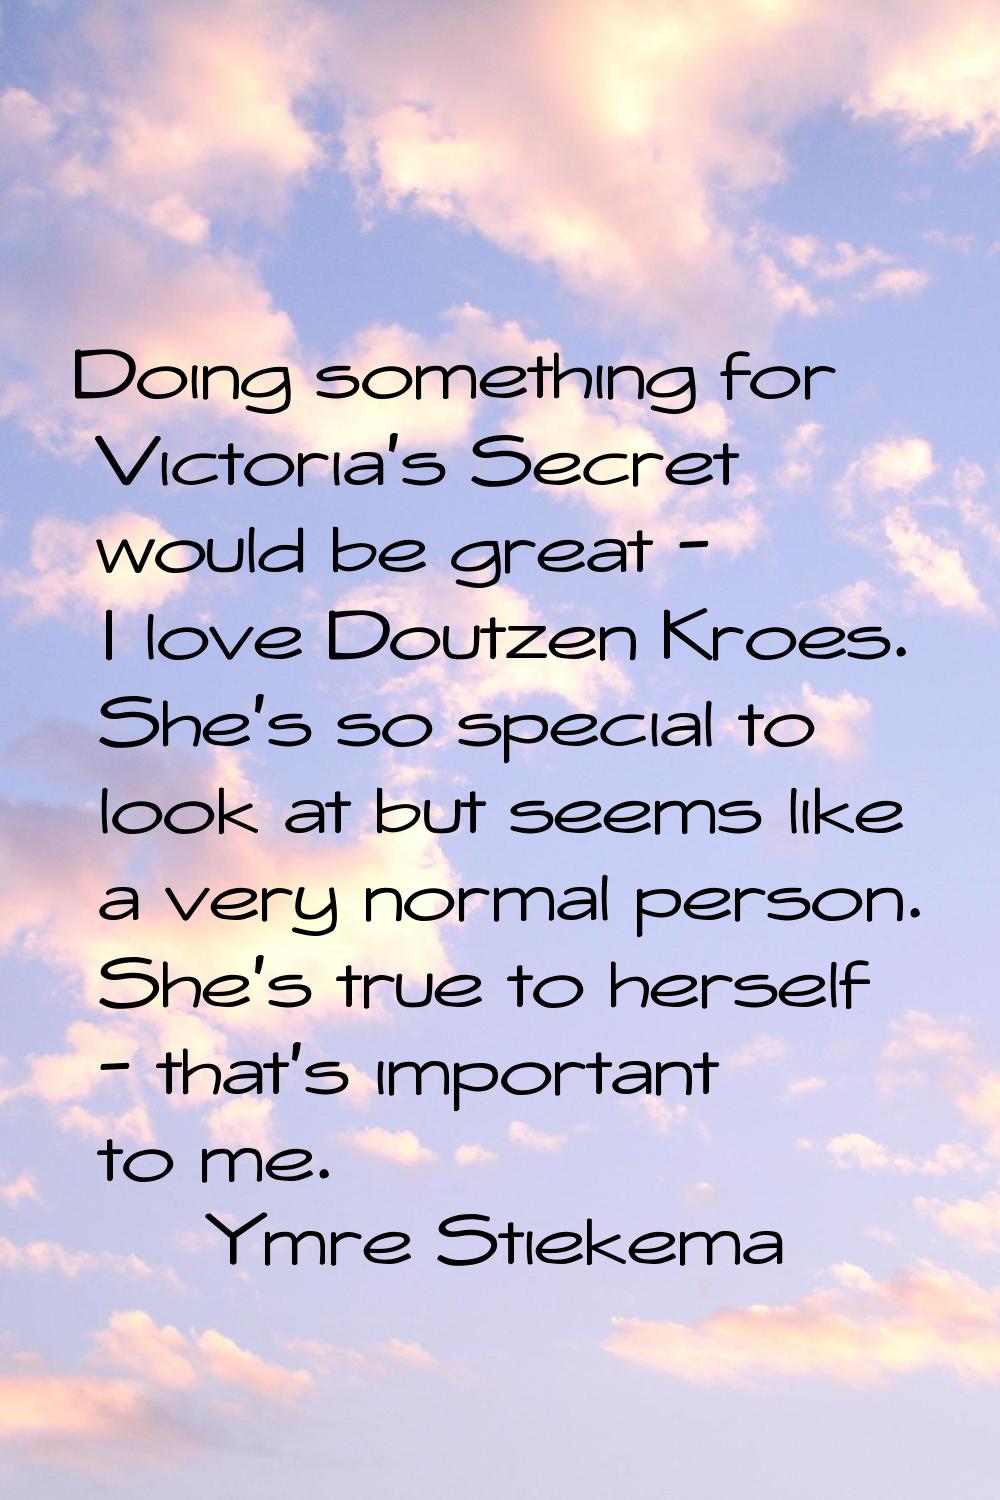 Doing something for Victoria's Secret would be great - I love Doutzen Kroes. She's so special to lo